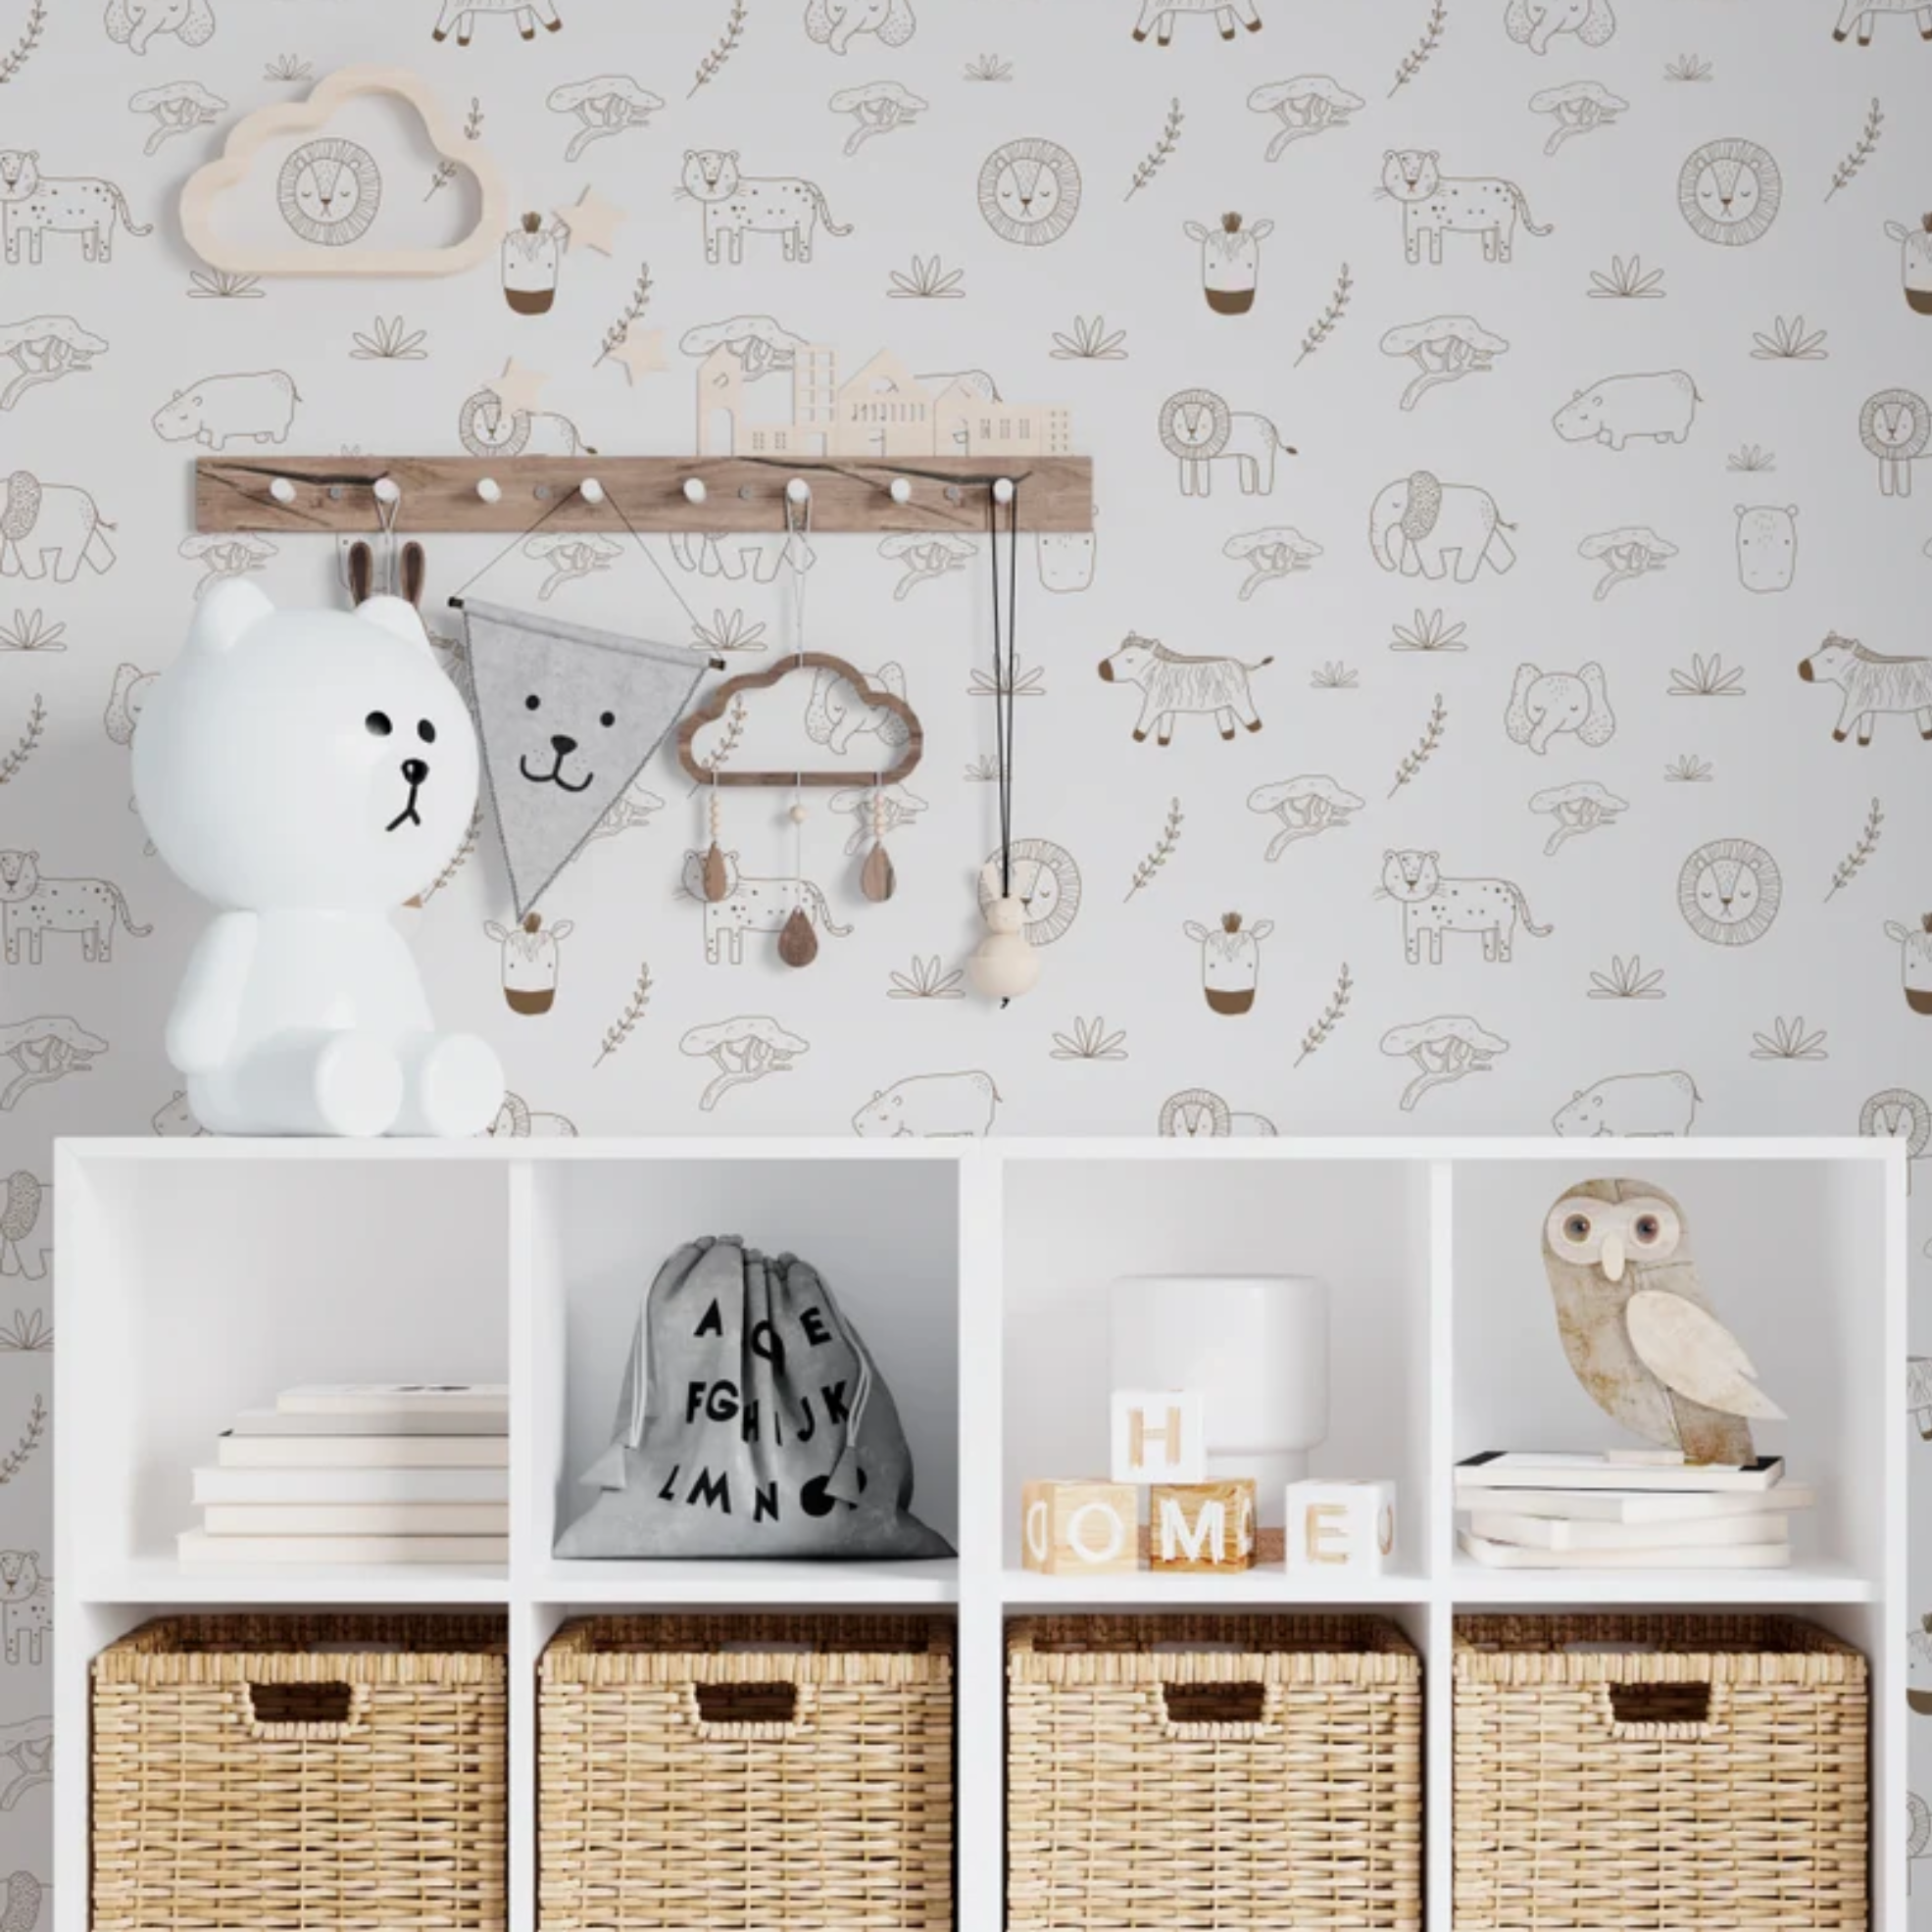 A cozy nursery corner showcasing Safari Jungle Wallpaper with a cute array of hand-drawn-style safari animals on a soft beige background. The scene includes a white storage unit with wicker baskets, a playful bear lamp, children’s accessories, and a wooden coat rack adorned with a charming cloud-shaped clock and baby essentials.